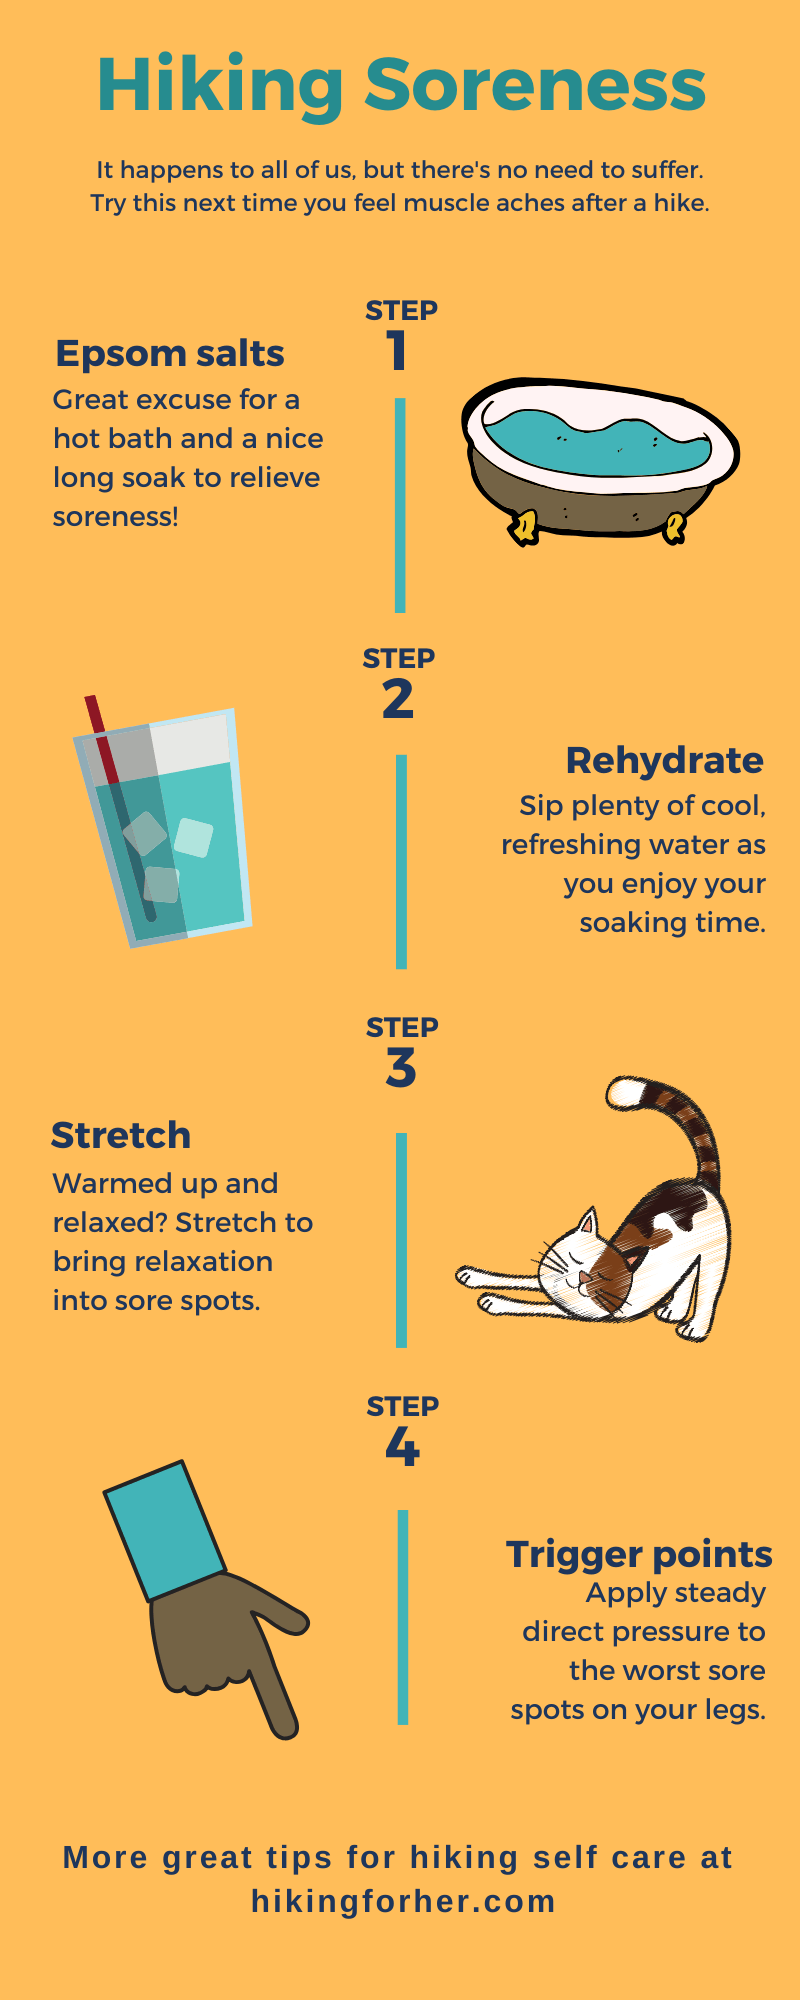 4 Stretches For After Hiking 